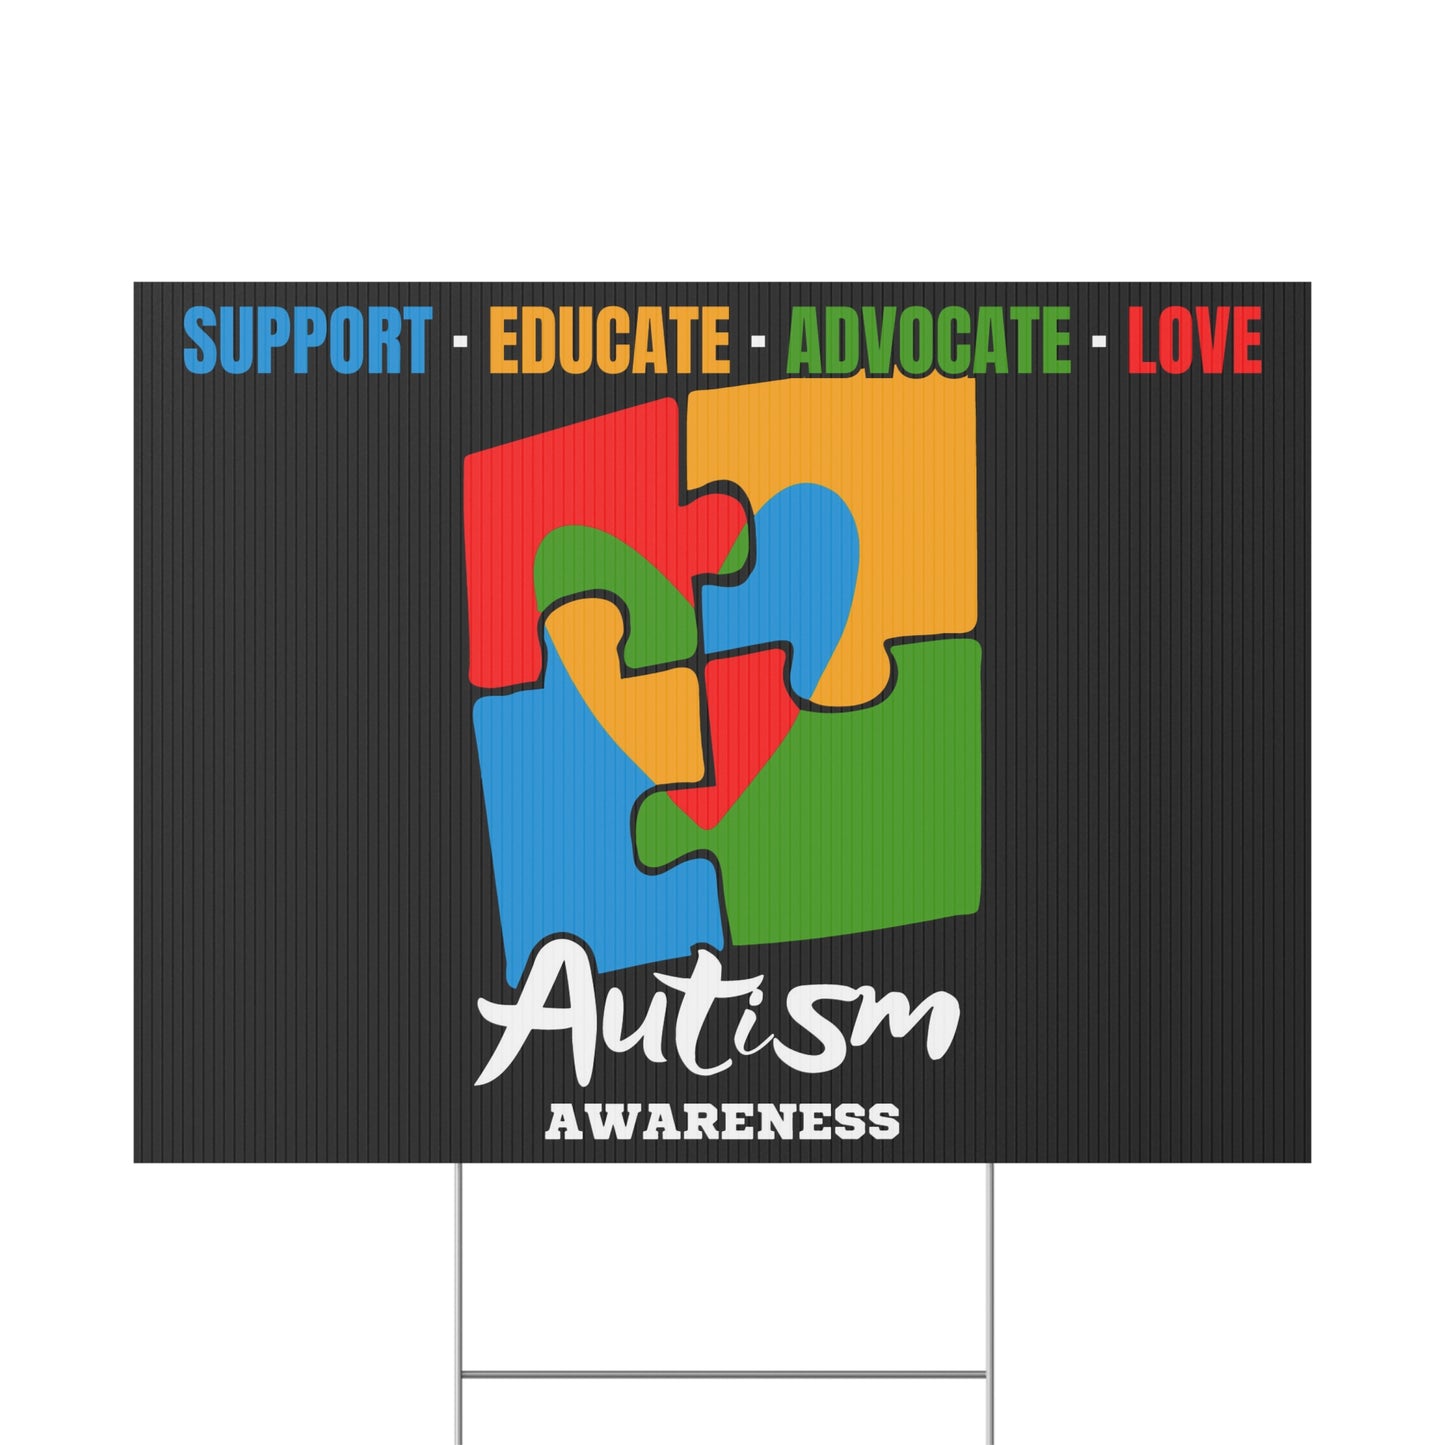 Autism Awareness Yard Sign, 18x12, 24x18, 36x24, Double Sided, H-Stake Included, v1